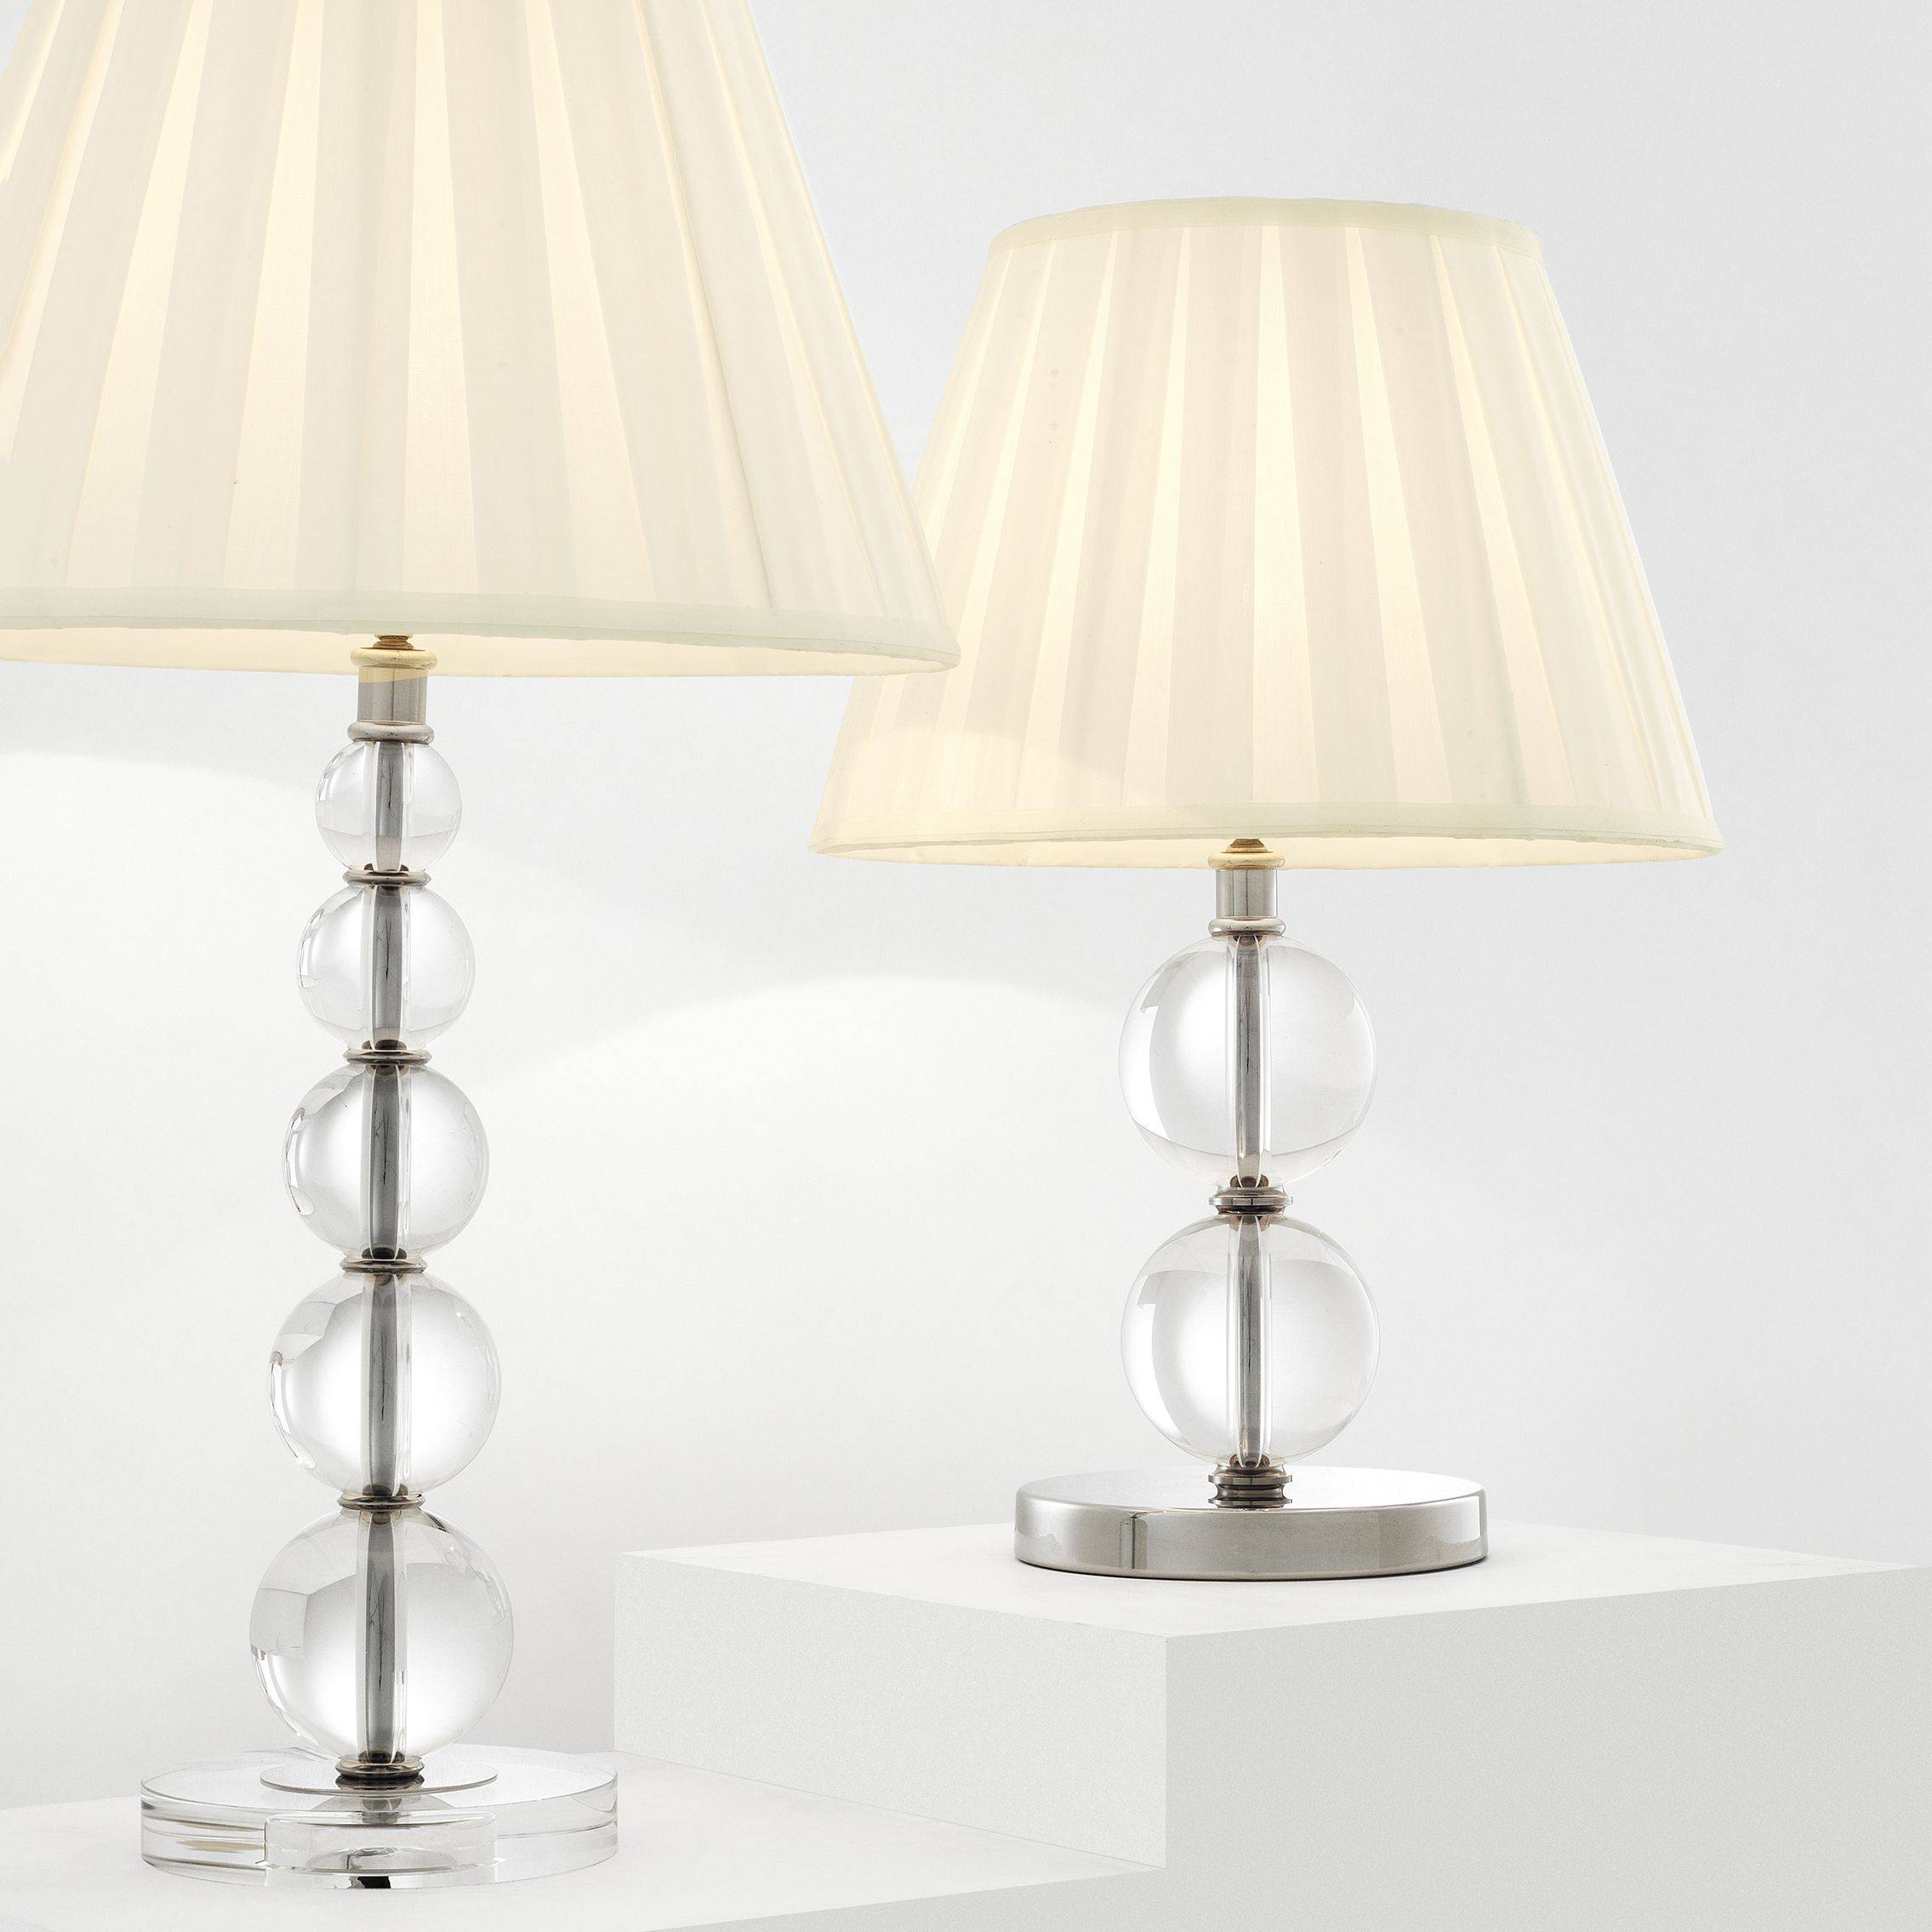 Lombard Table Lamp - [Crystal&Nickel] - Eichholtz - Luxury Lighting Boutique